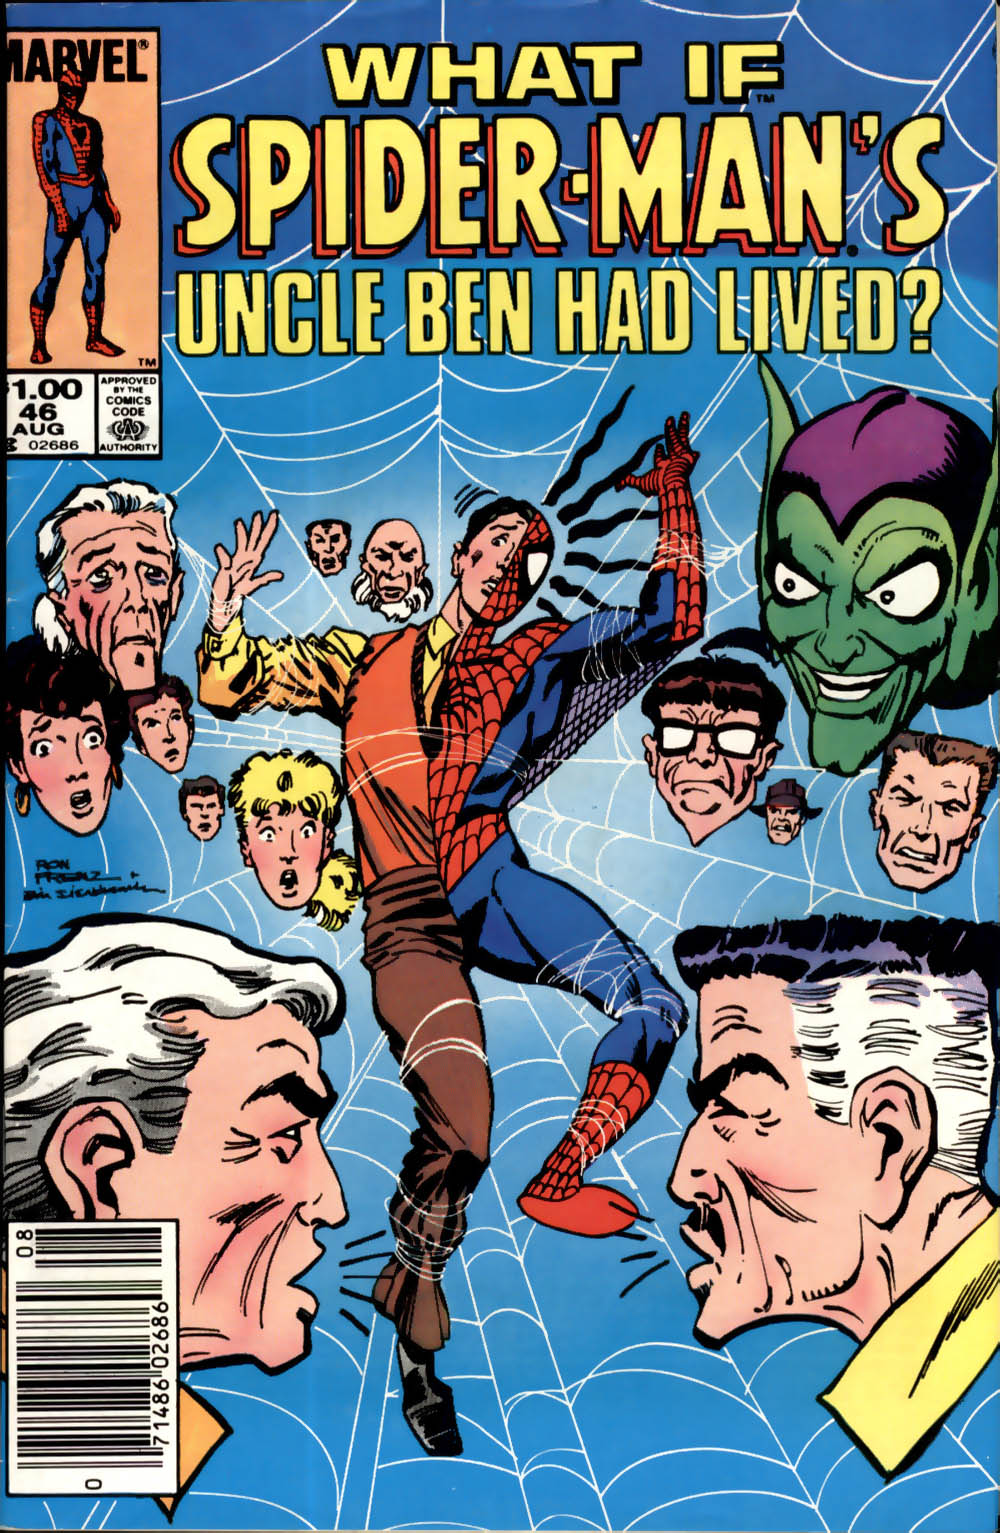 What If? (1977) issue 46 - Spiderman's uncle ben had lived - Page 1